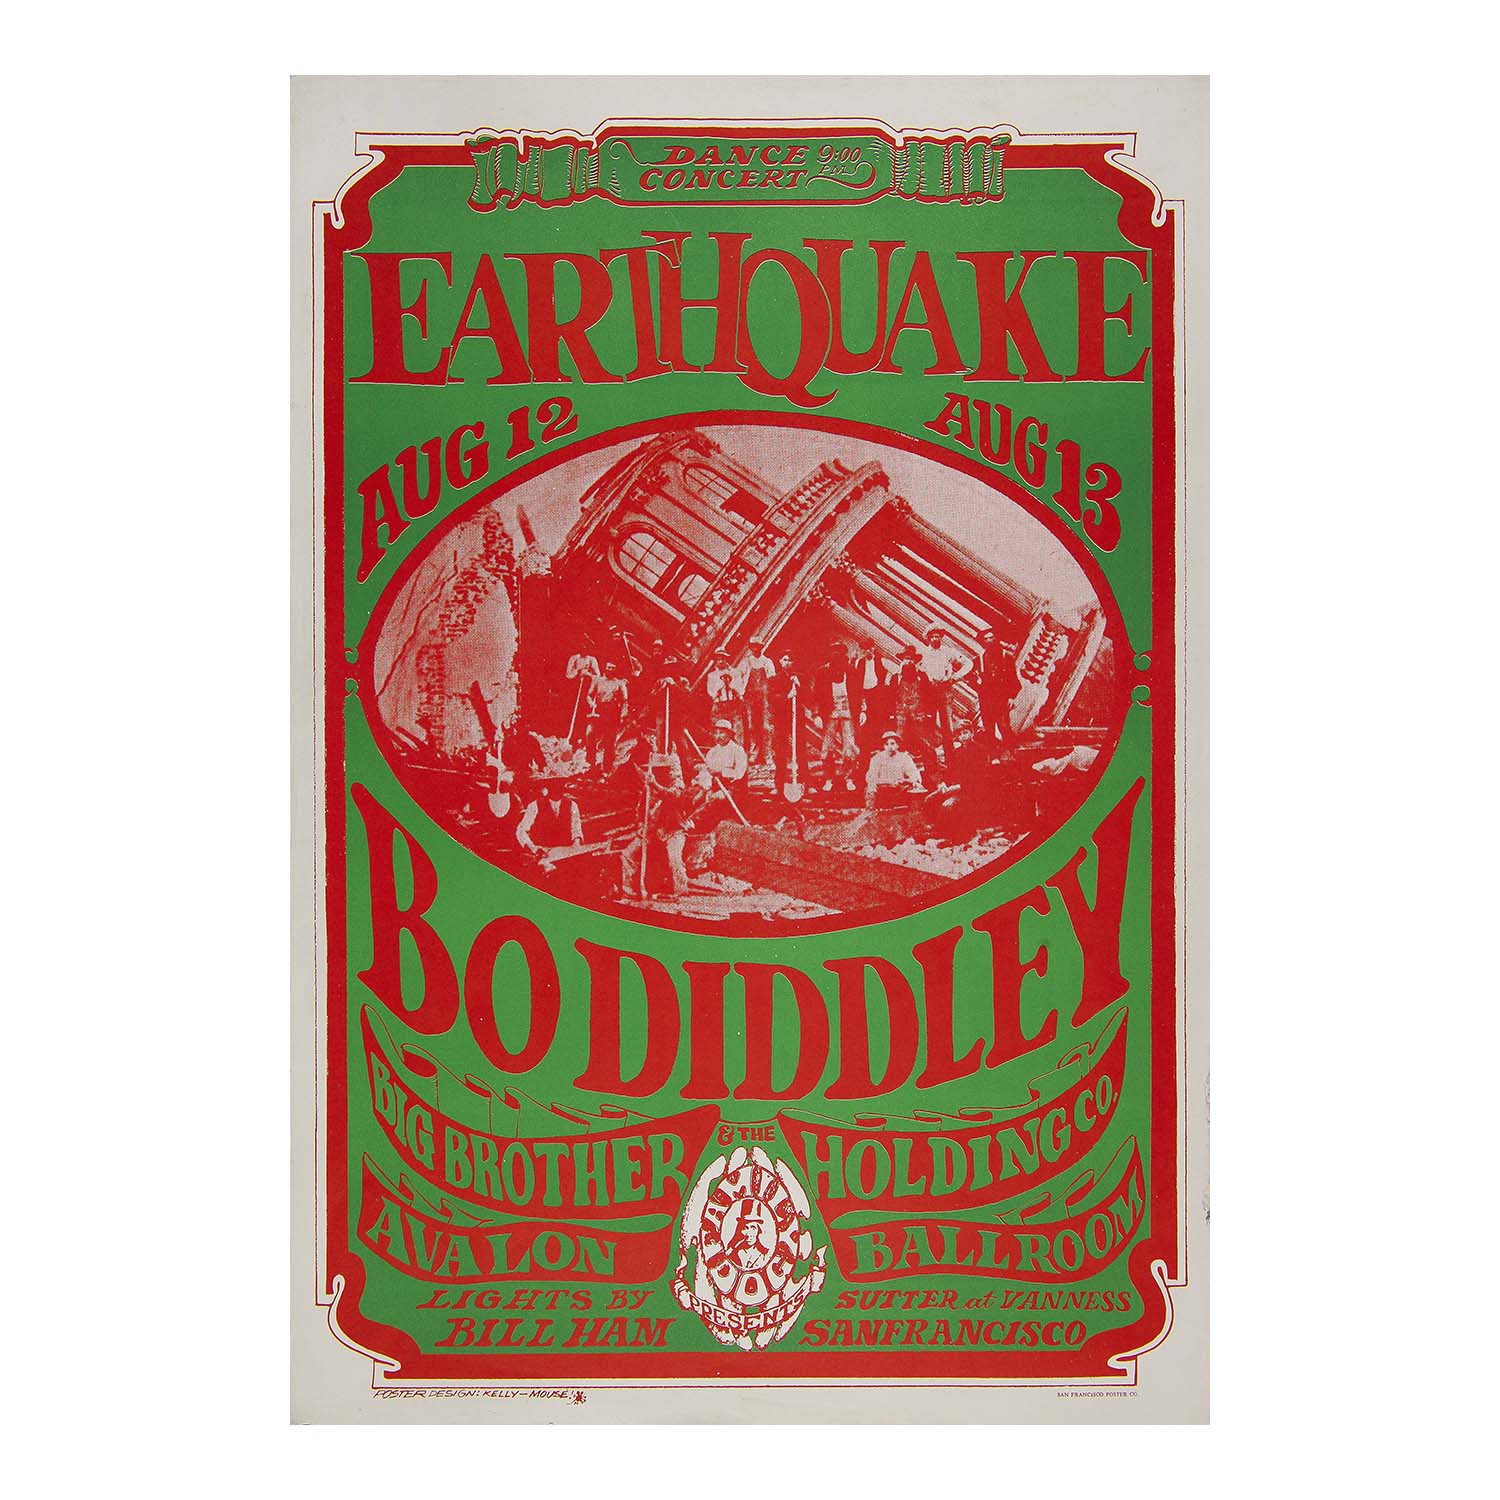 Earthquake, Bo Diddley and Big Brother and the Holding Company at Avalon Ballroom,